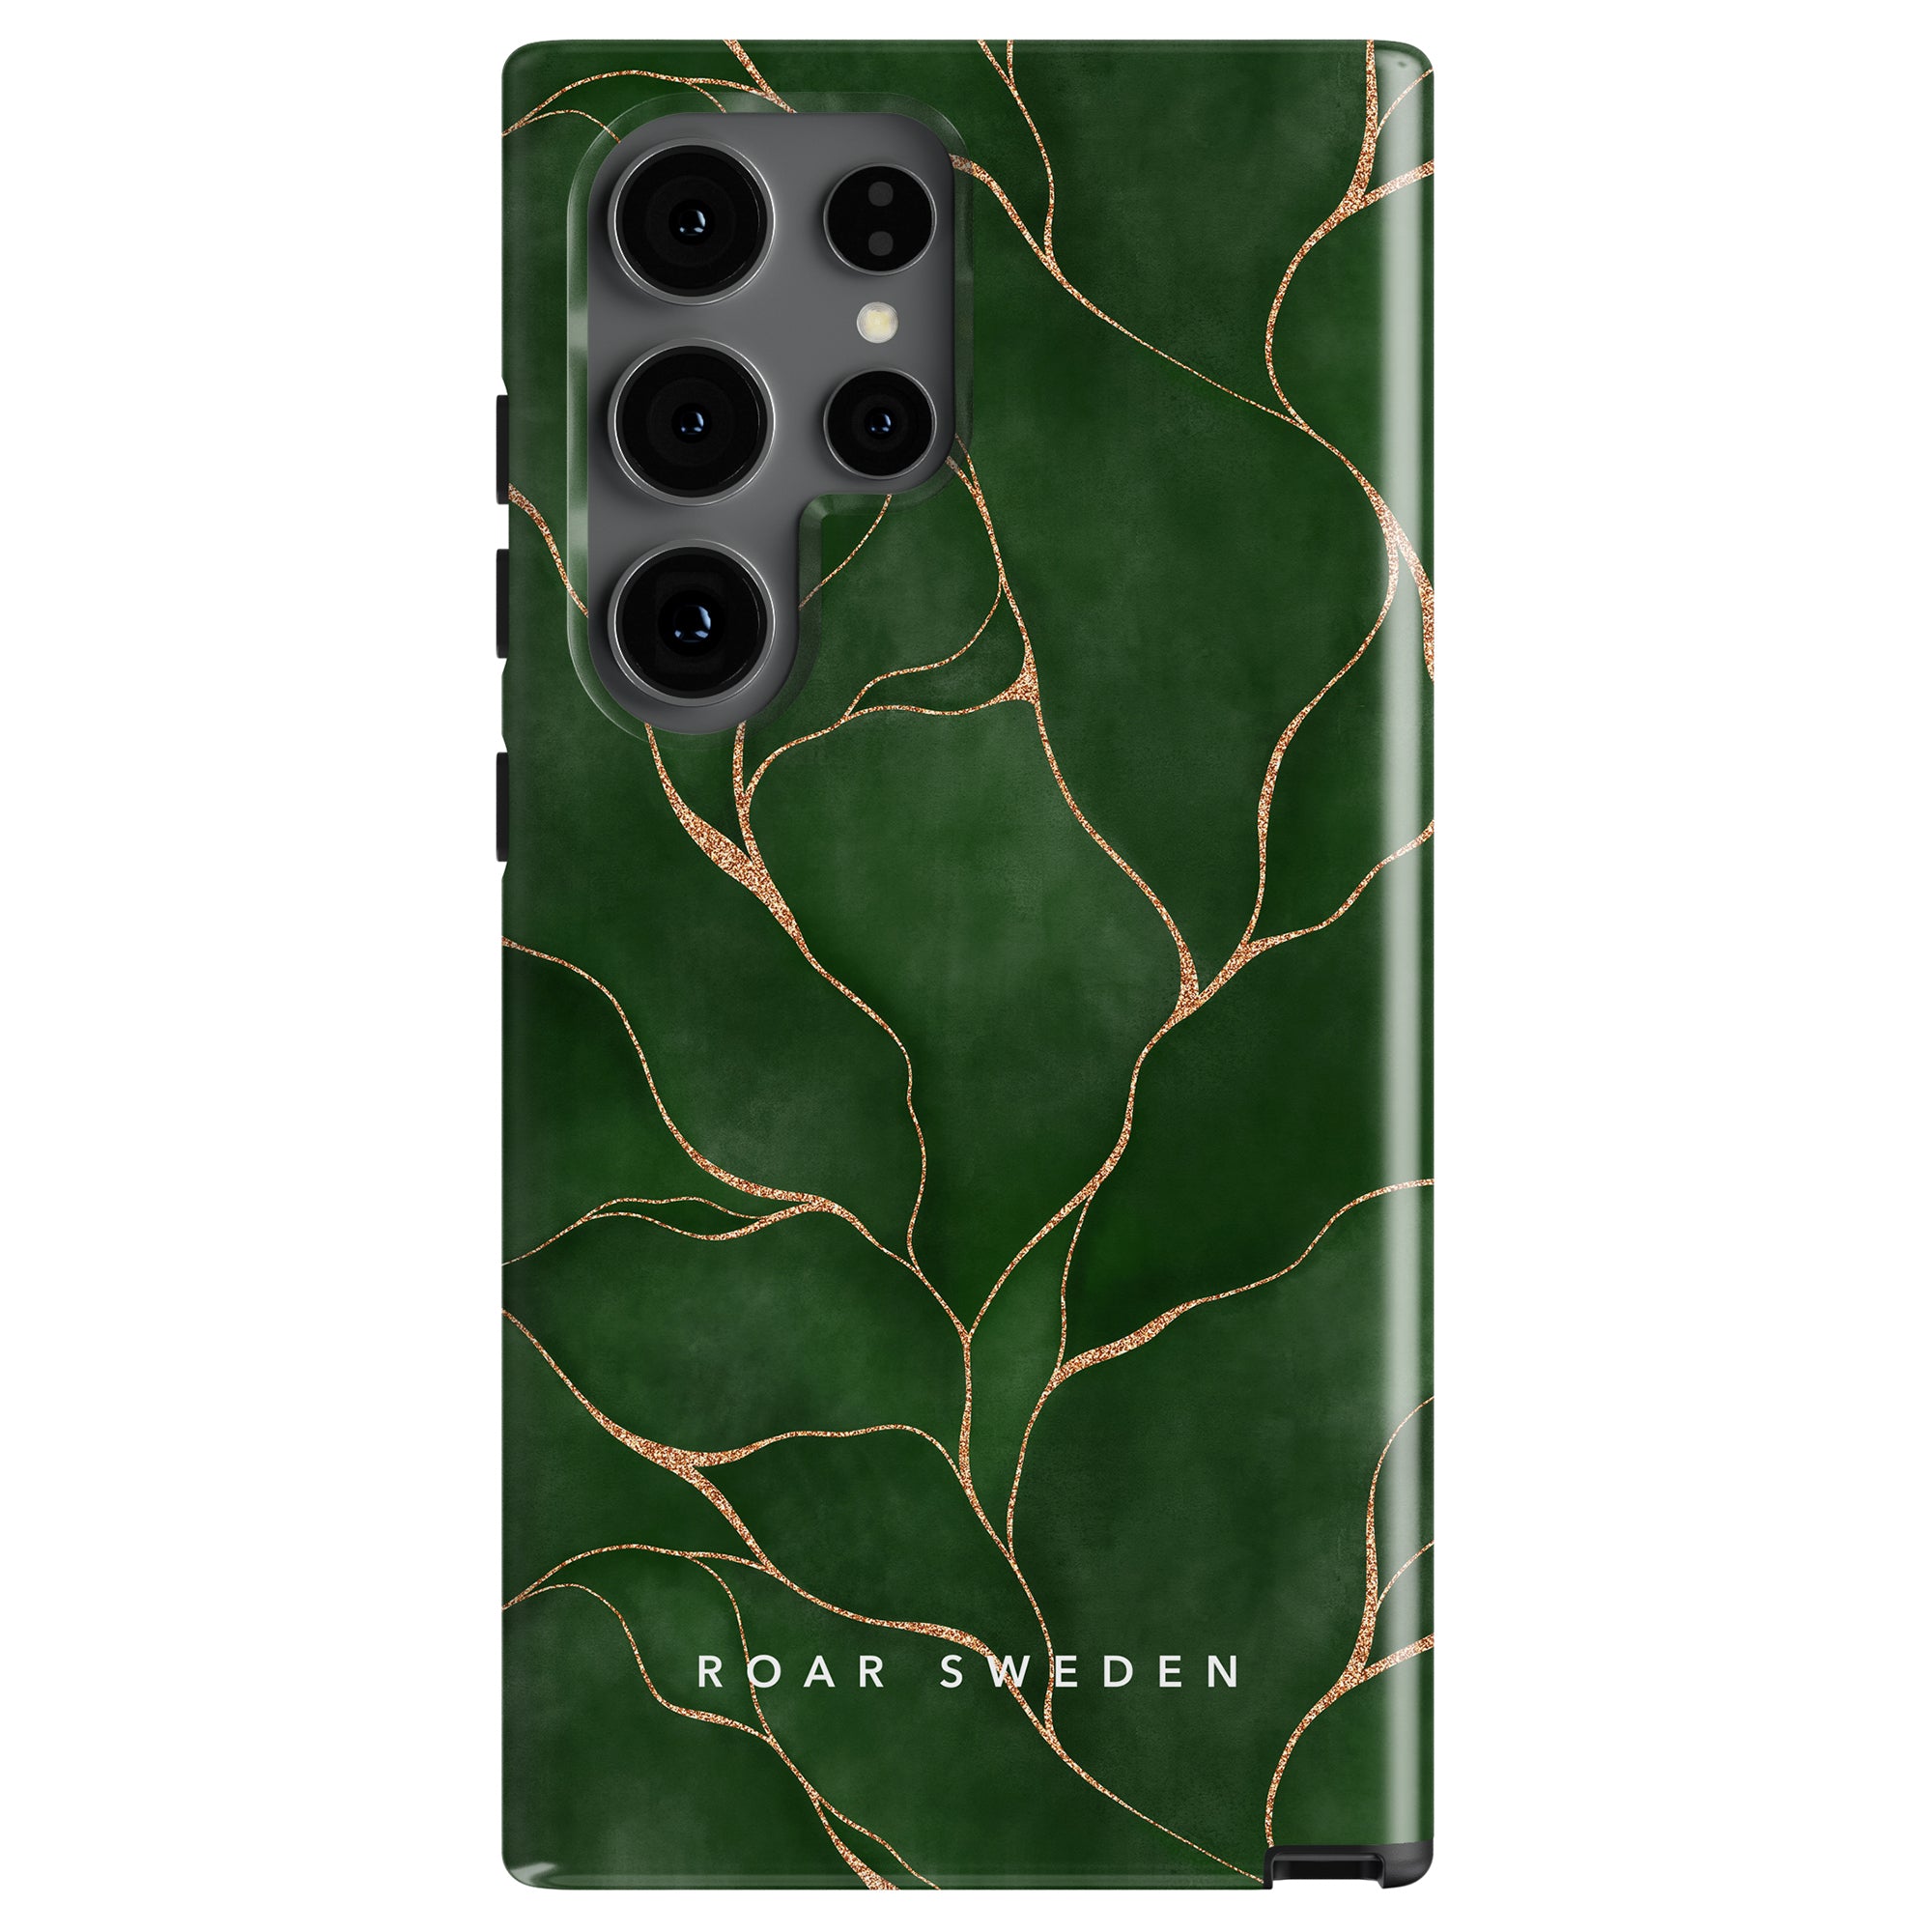 A stylish smartphone with a Tree of Life - Tough Case featuring an abstract gold line design, complemented by the text "ROAR SWEDEN" elegantly printed on the lower part.